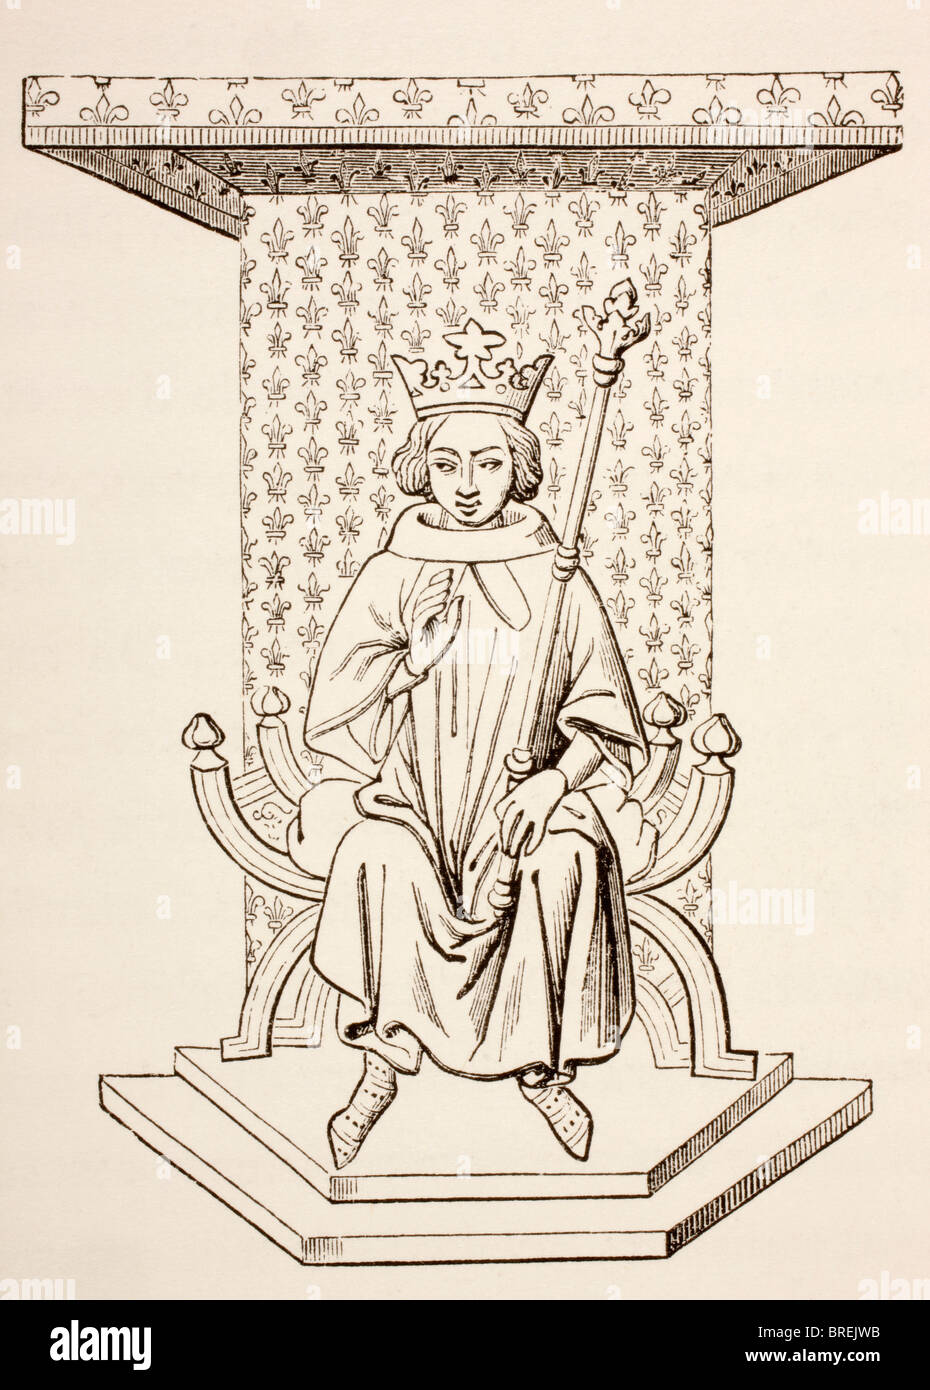 King Louis IX of France, 1214 - 1270, seated on his throne with a fleur-de-lis wall hanging behind him. Stock Photo